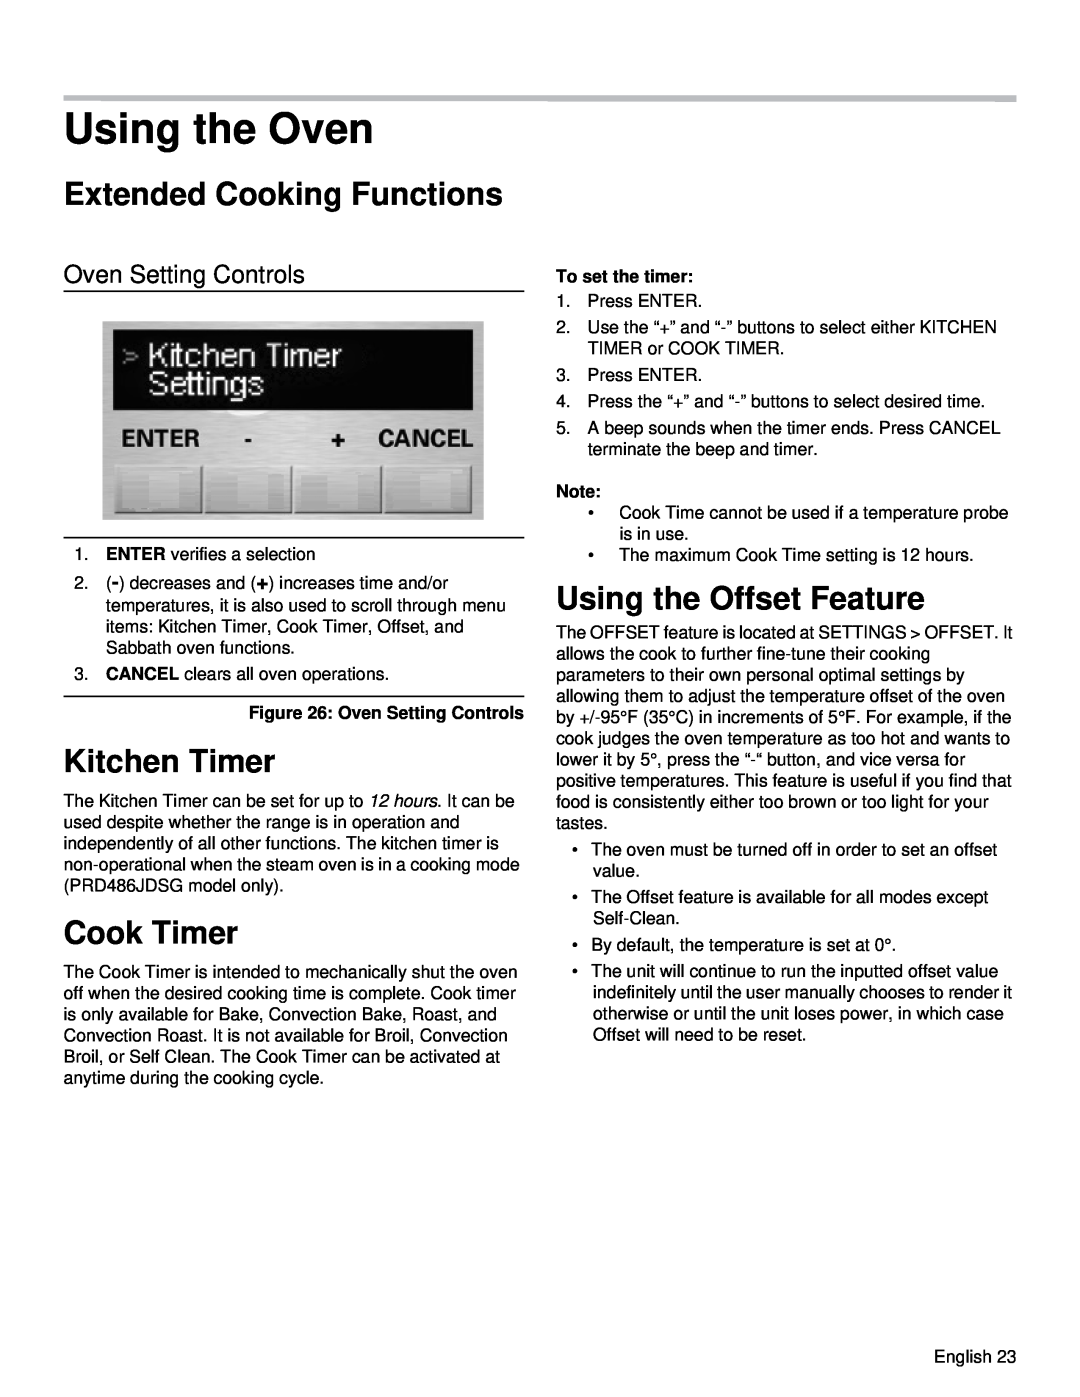 Thermador PRD48, PRD36 Using the Oven, Extended Cooking Functions, Kitchen Timer, Cook Timer, Using the Offset Feature 